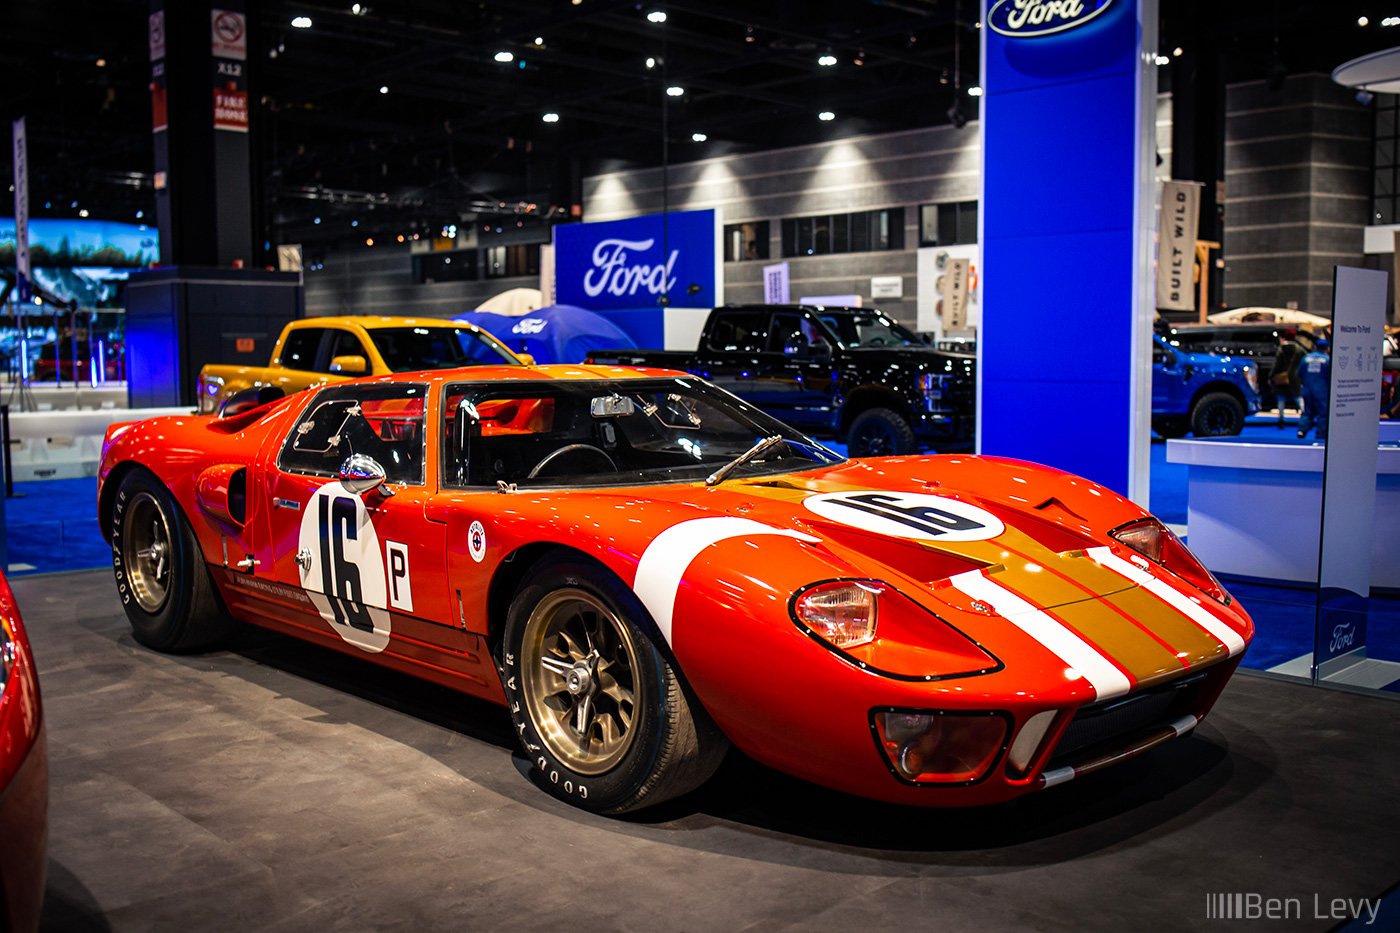 1966 Ford AM GT-1 Prototype at the 2022 Chicago Auto Show